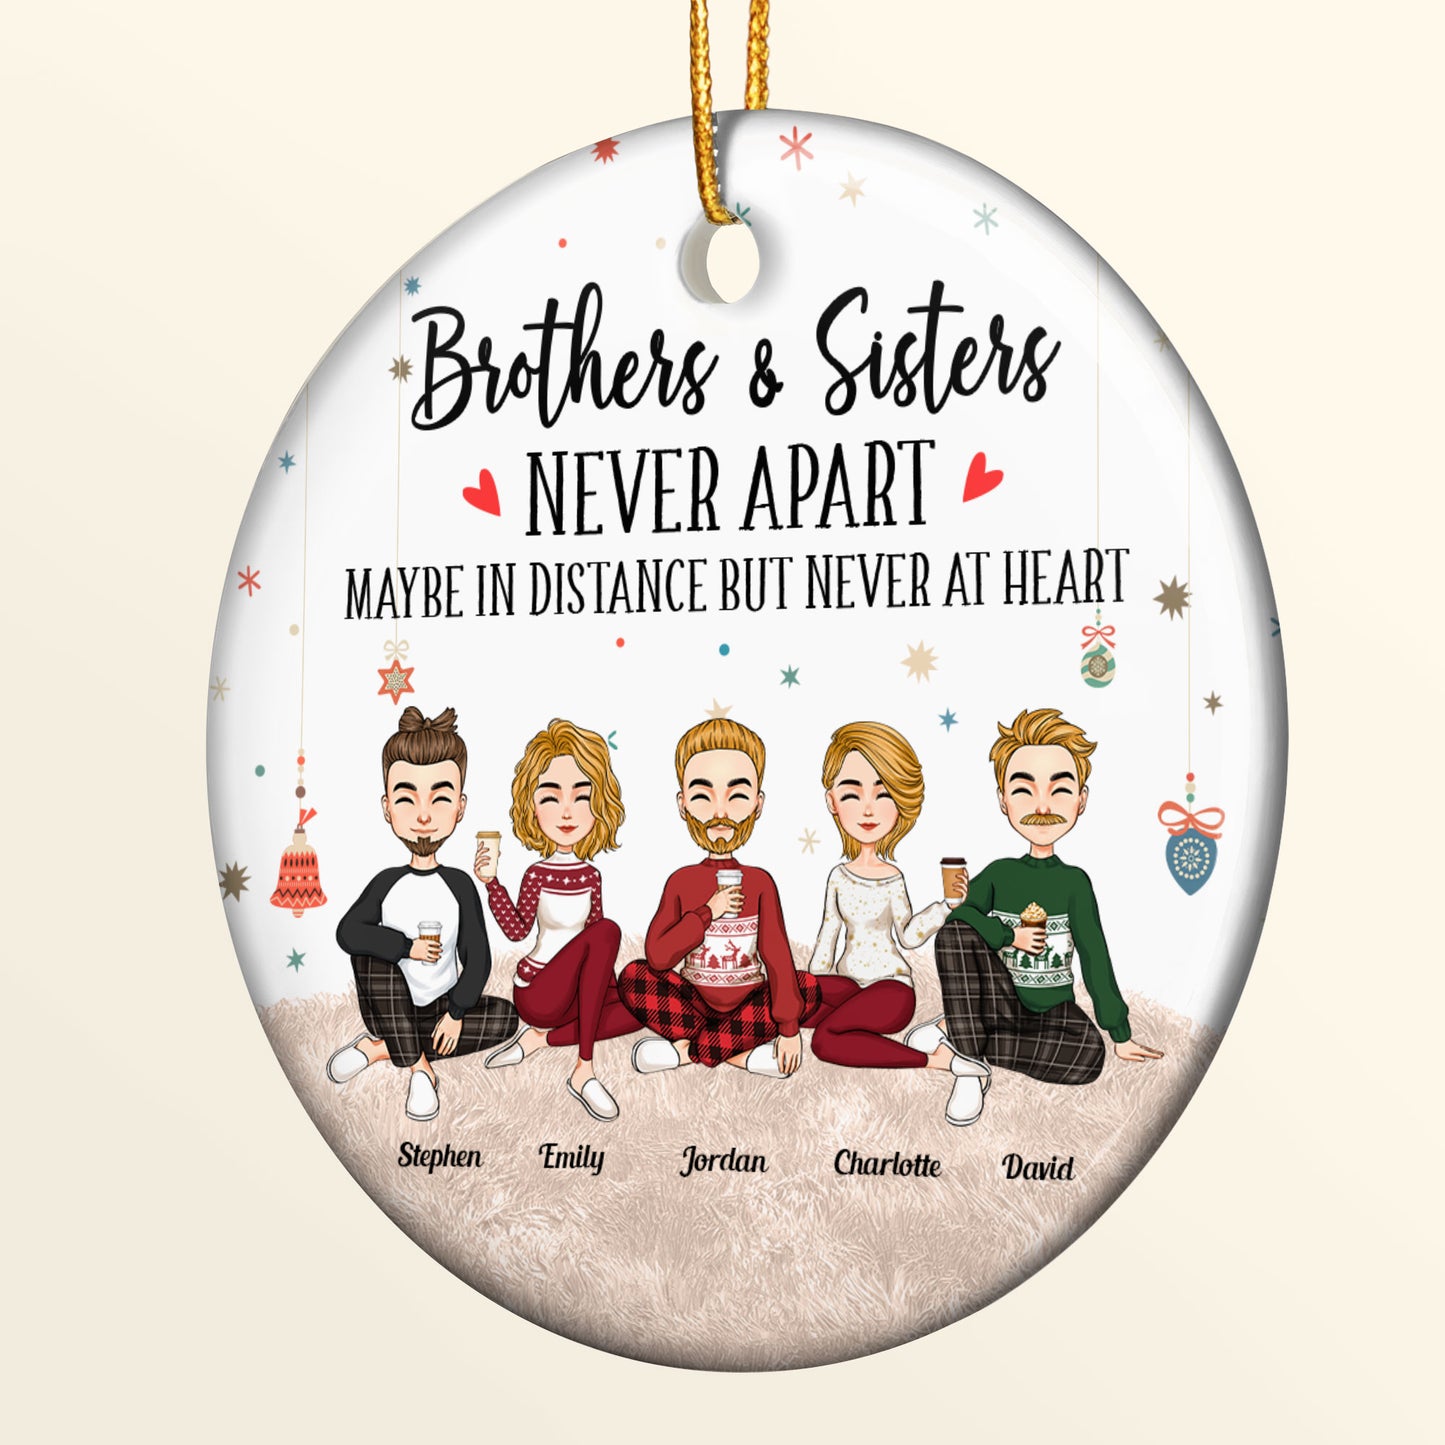 Brothers & Sisters Are Never Apart - Personalized Ceramic Ornament - Christmas, New Year Gift For Family, Sisters, Brothers, Siblings